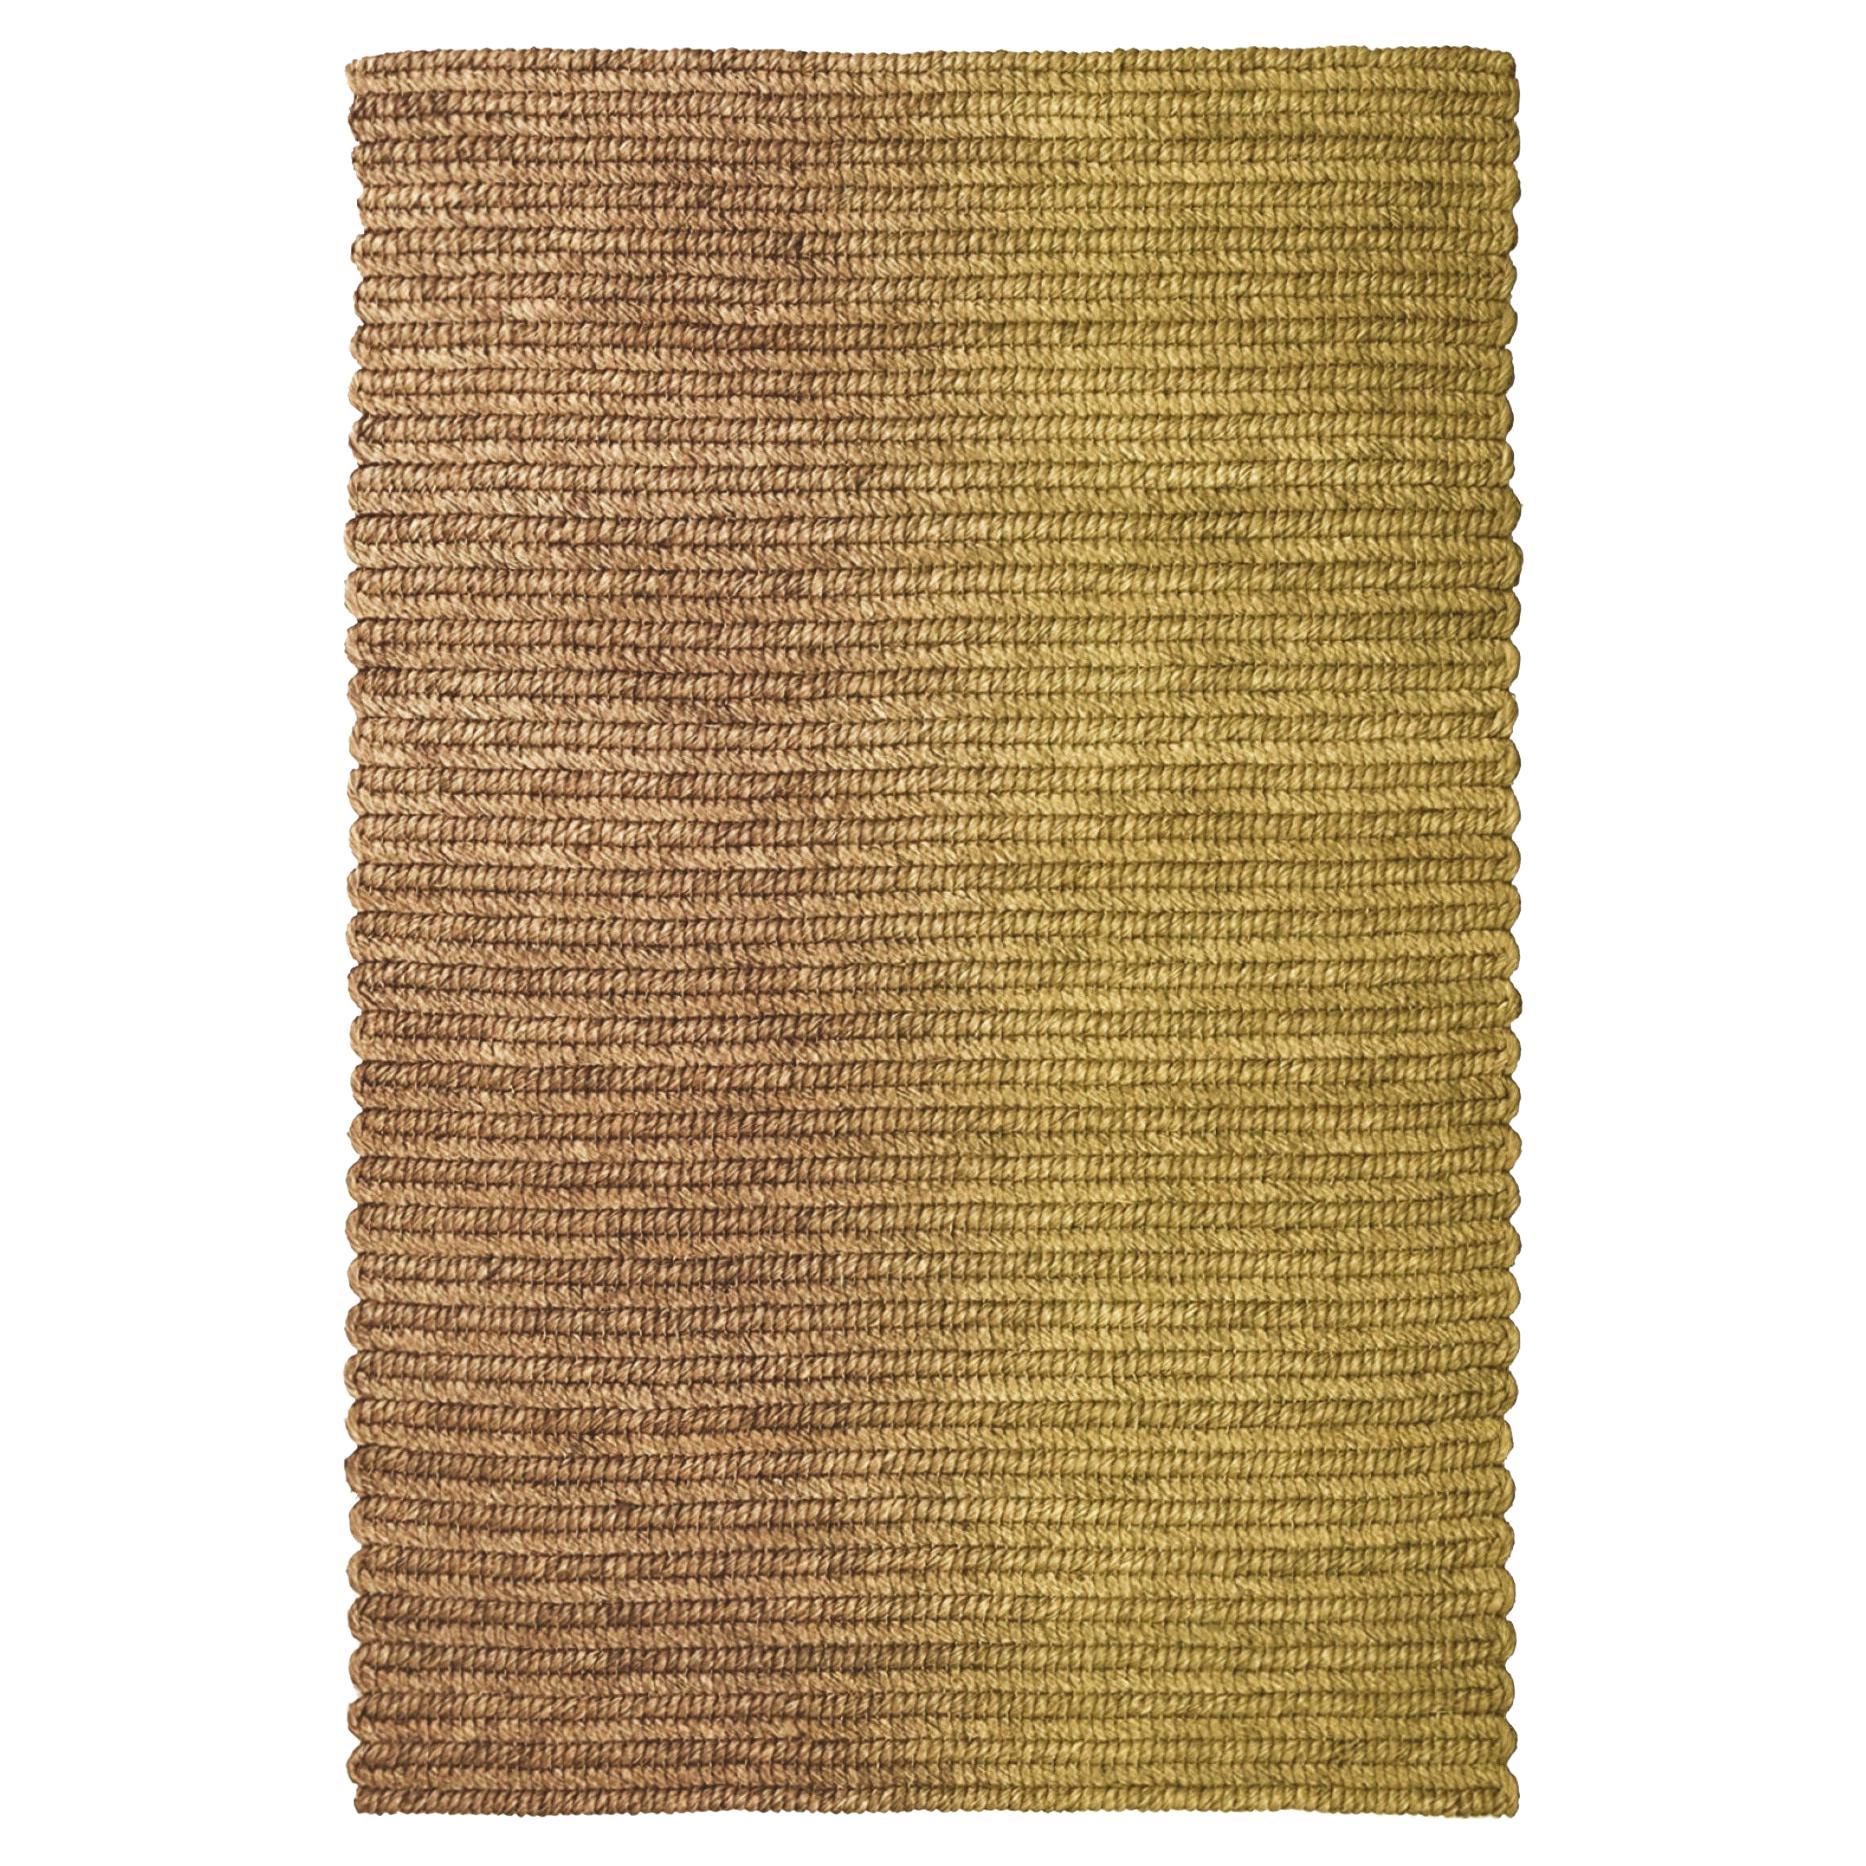 'Switch' Rug in Abaca, 'Spice', by Claire Vos for Musett Design For Sale